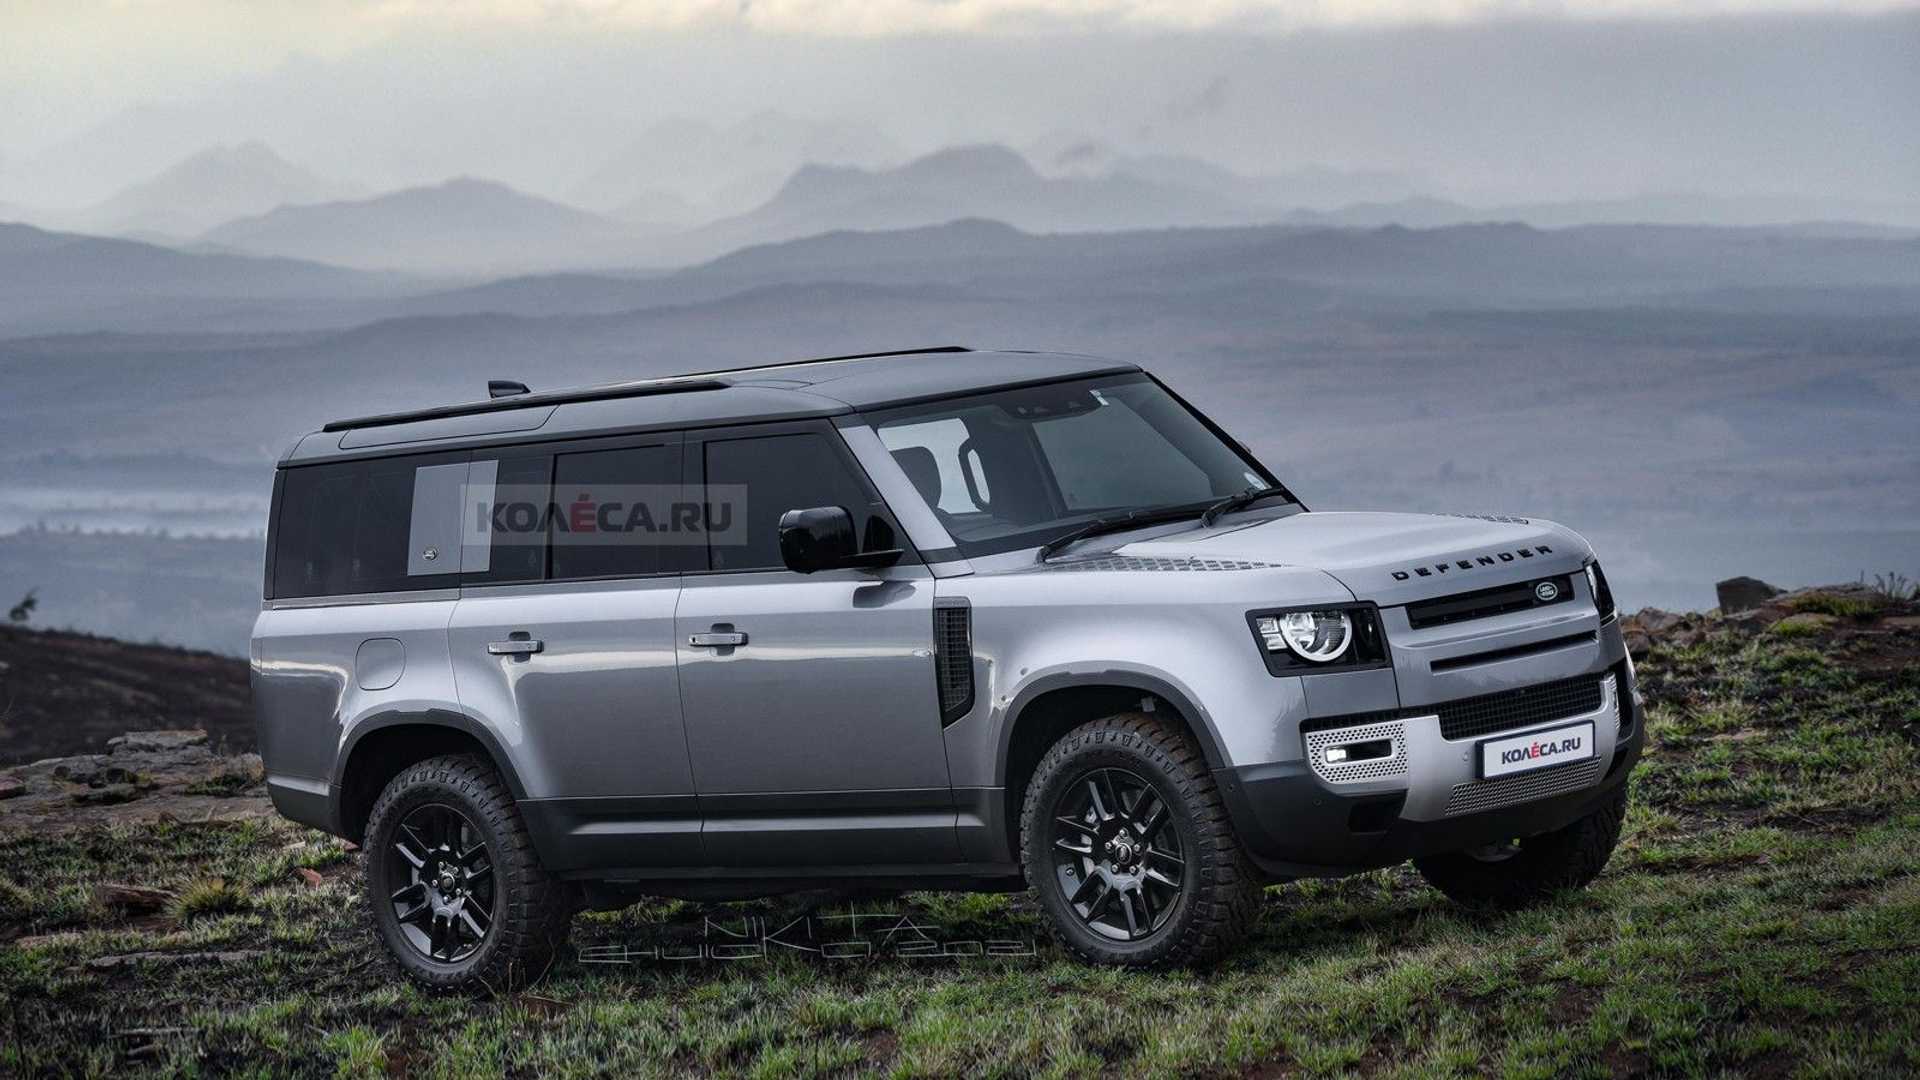 Land Rover Defender 130 Looks Like a Jeep Wagoneer Fighter in Accurate